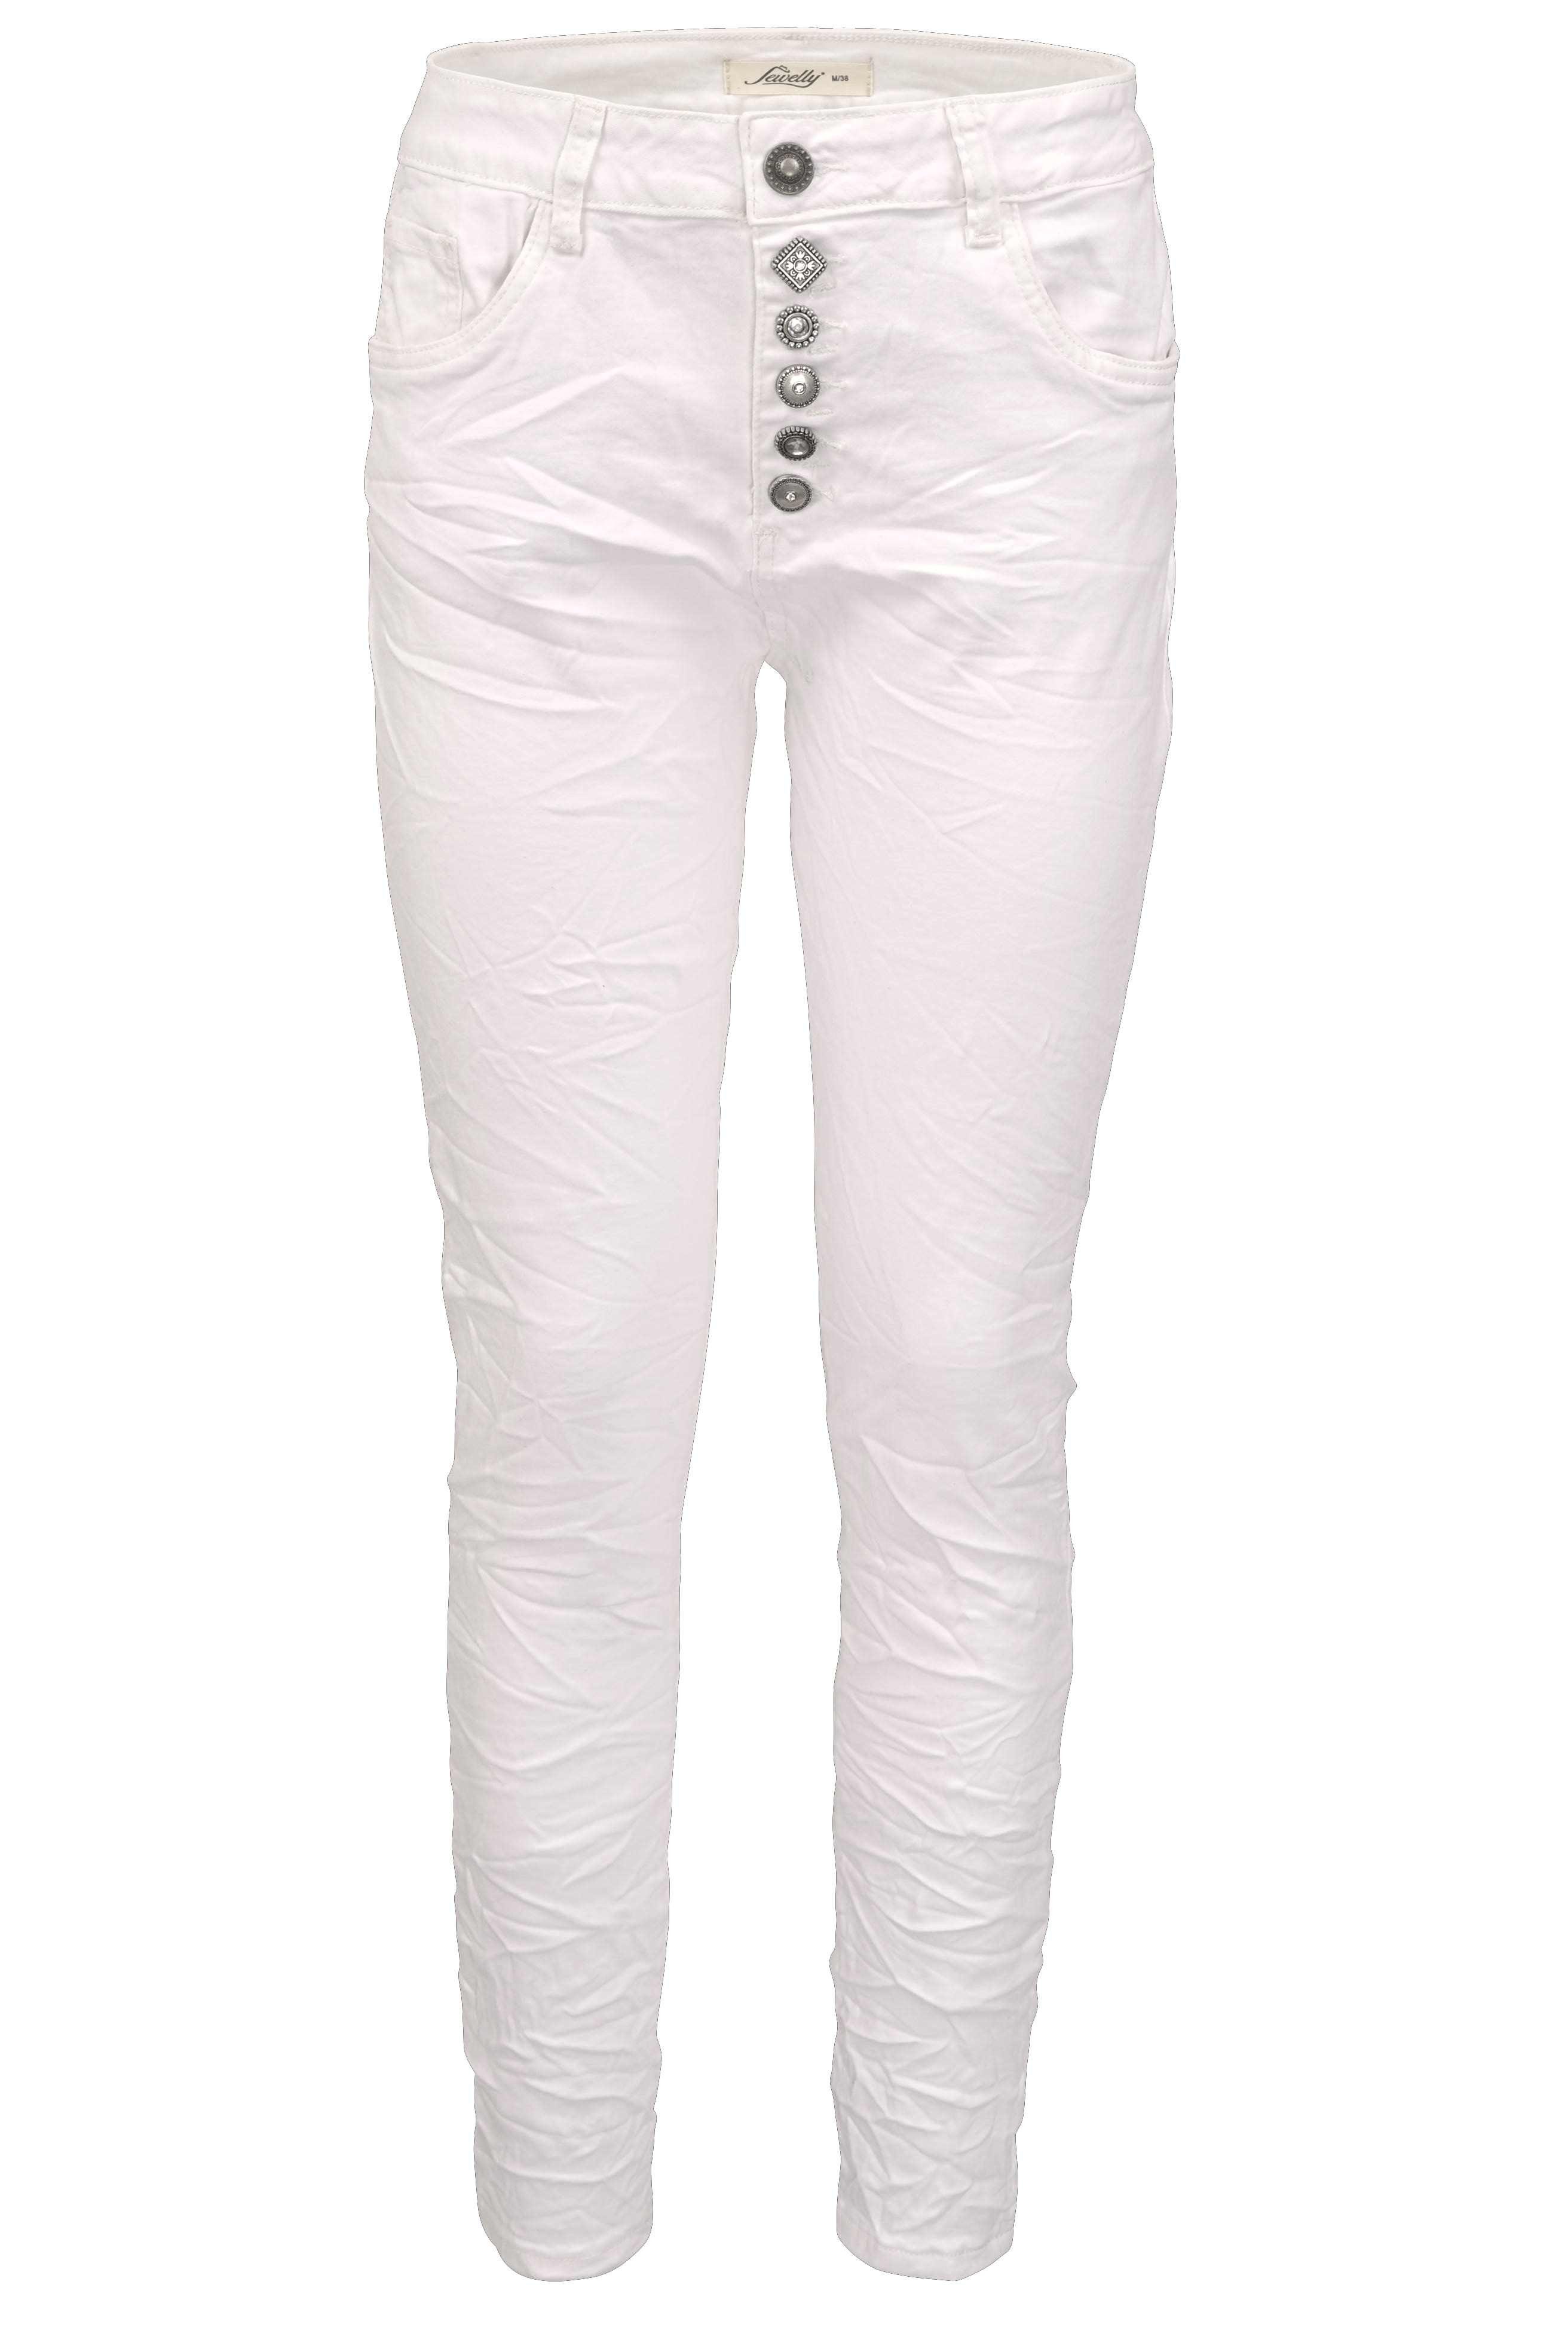 Jewelly Regular-fit-Jeans Stretch Jeans Five-Pocket im Crash-Look Weiß | Straight-Fit Jeans